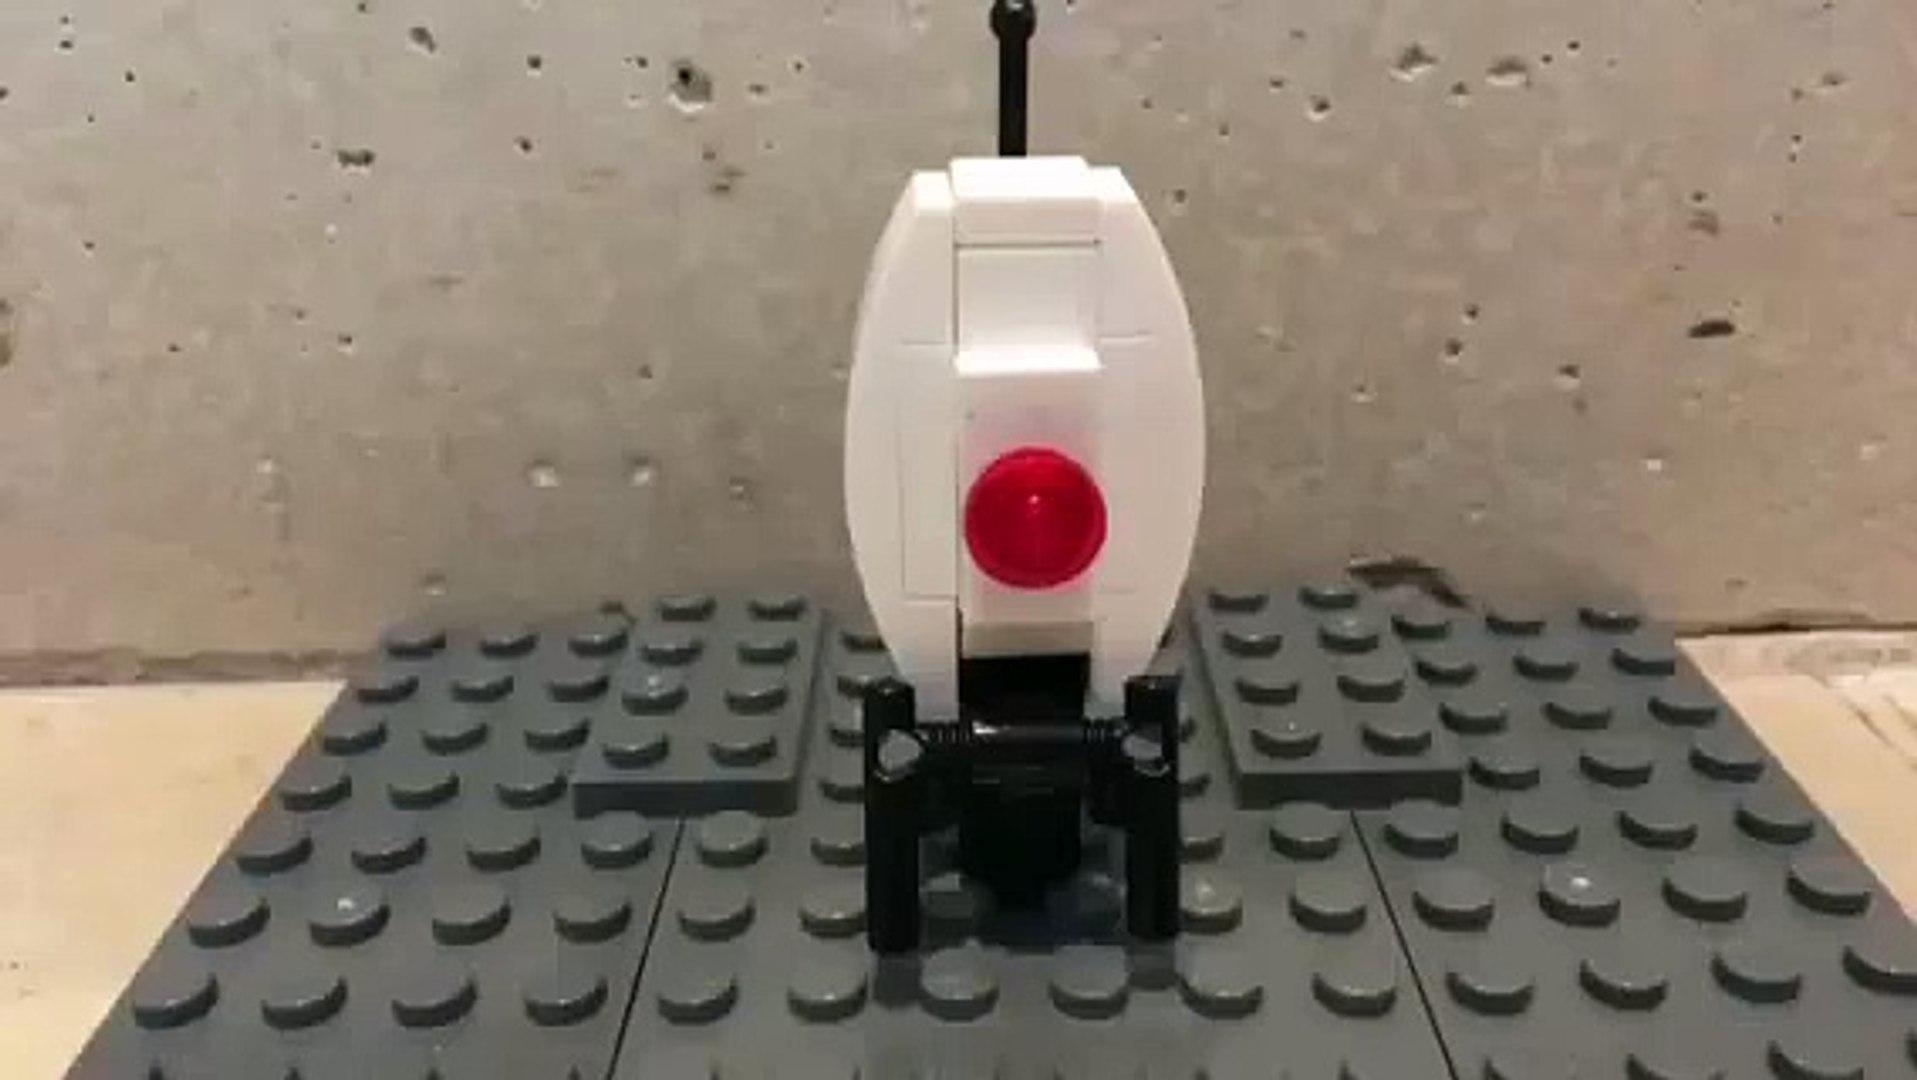 Lego Portal 2 Sentry Turret Song Stop Motion Video Dailymotion